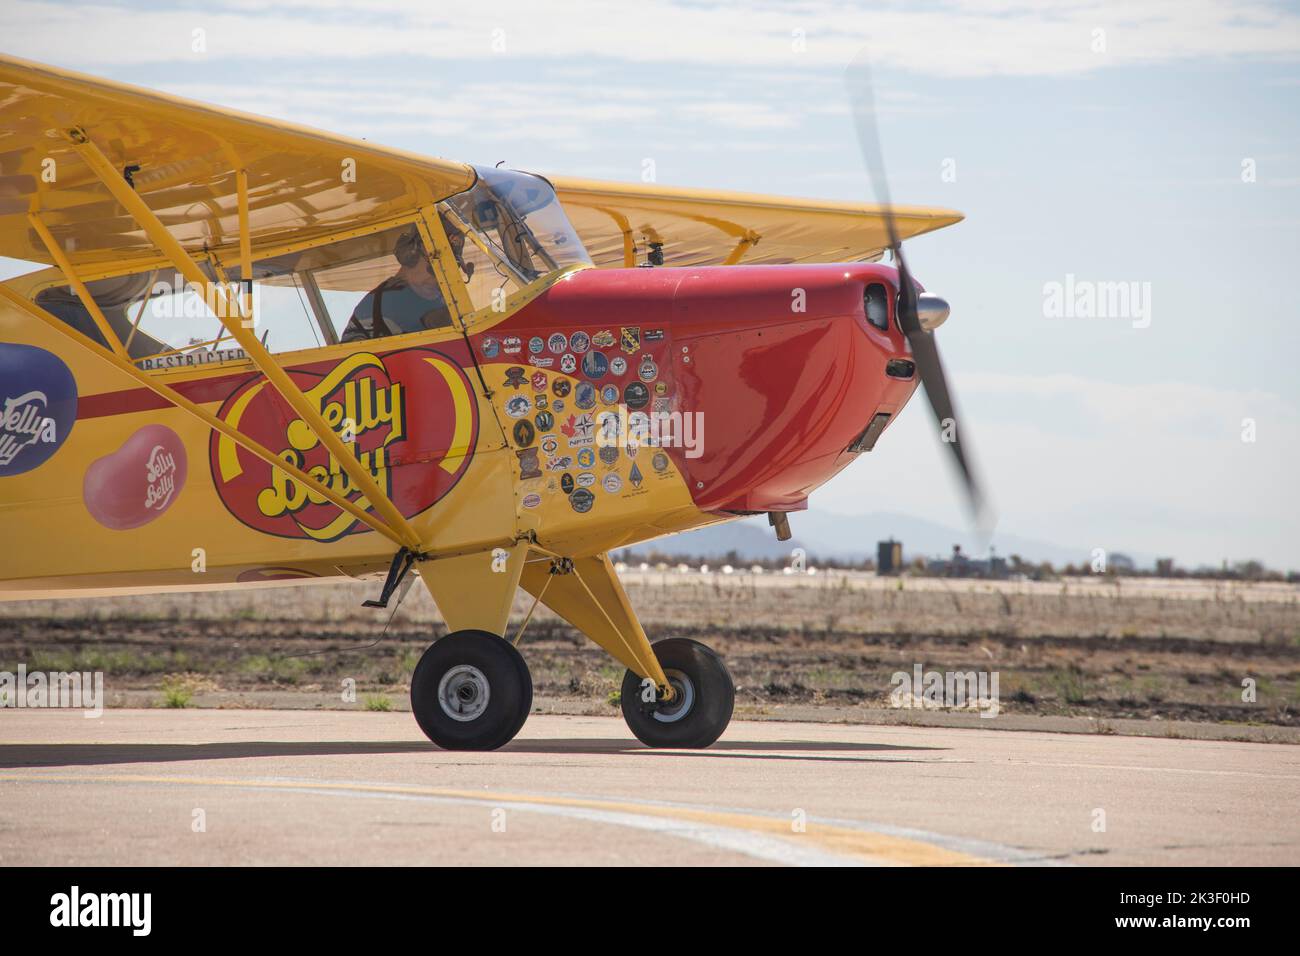 Kent Pietsch, piloting his Interstate Cadet, comes to a stop after performing aerobatics during the 2022 Miramar Air Show at MCAS Miramar, September 24, 2022 in San Diego, California. Stock Photo